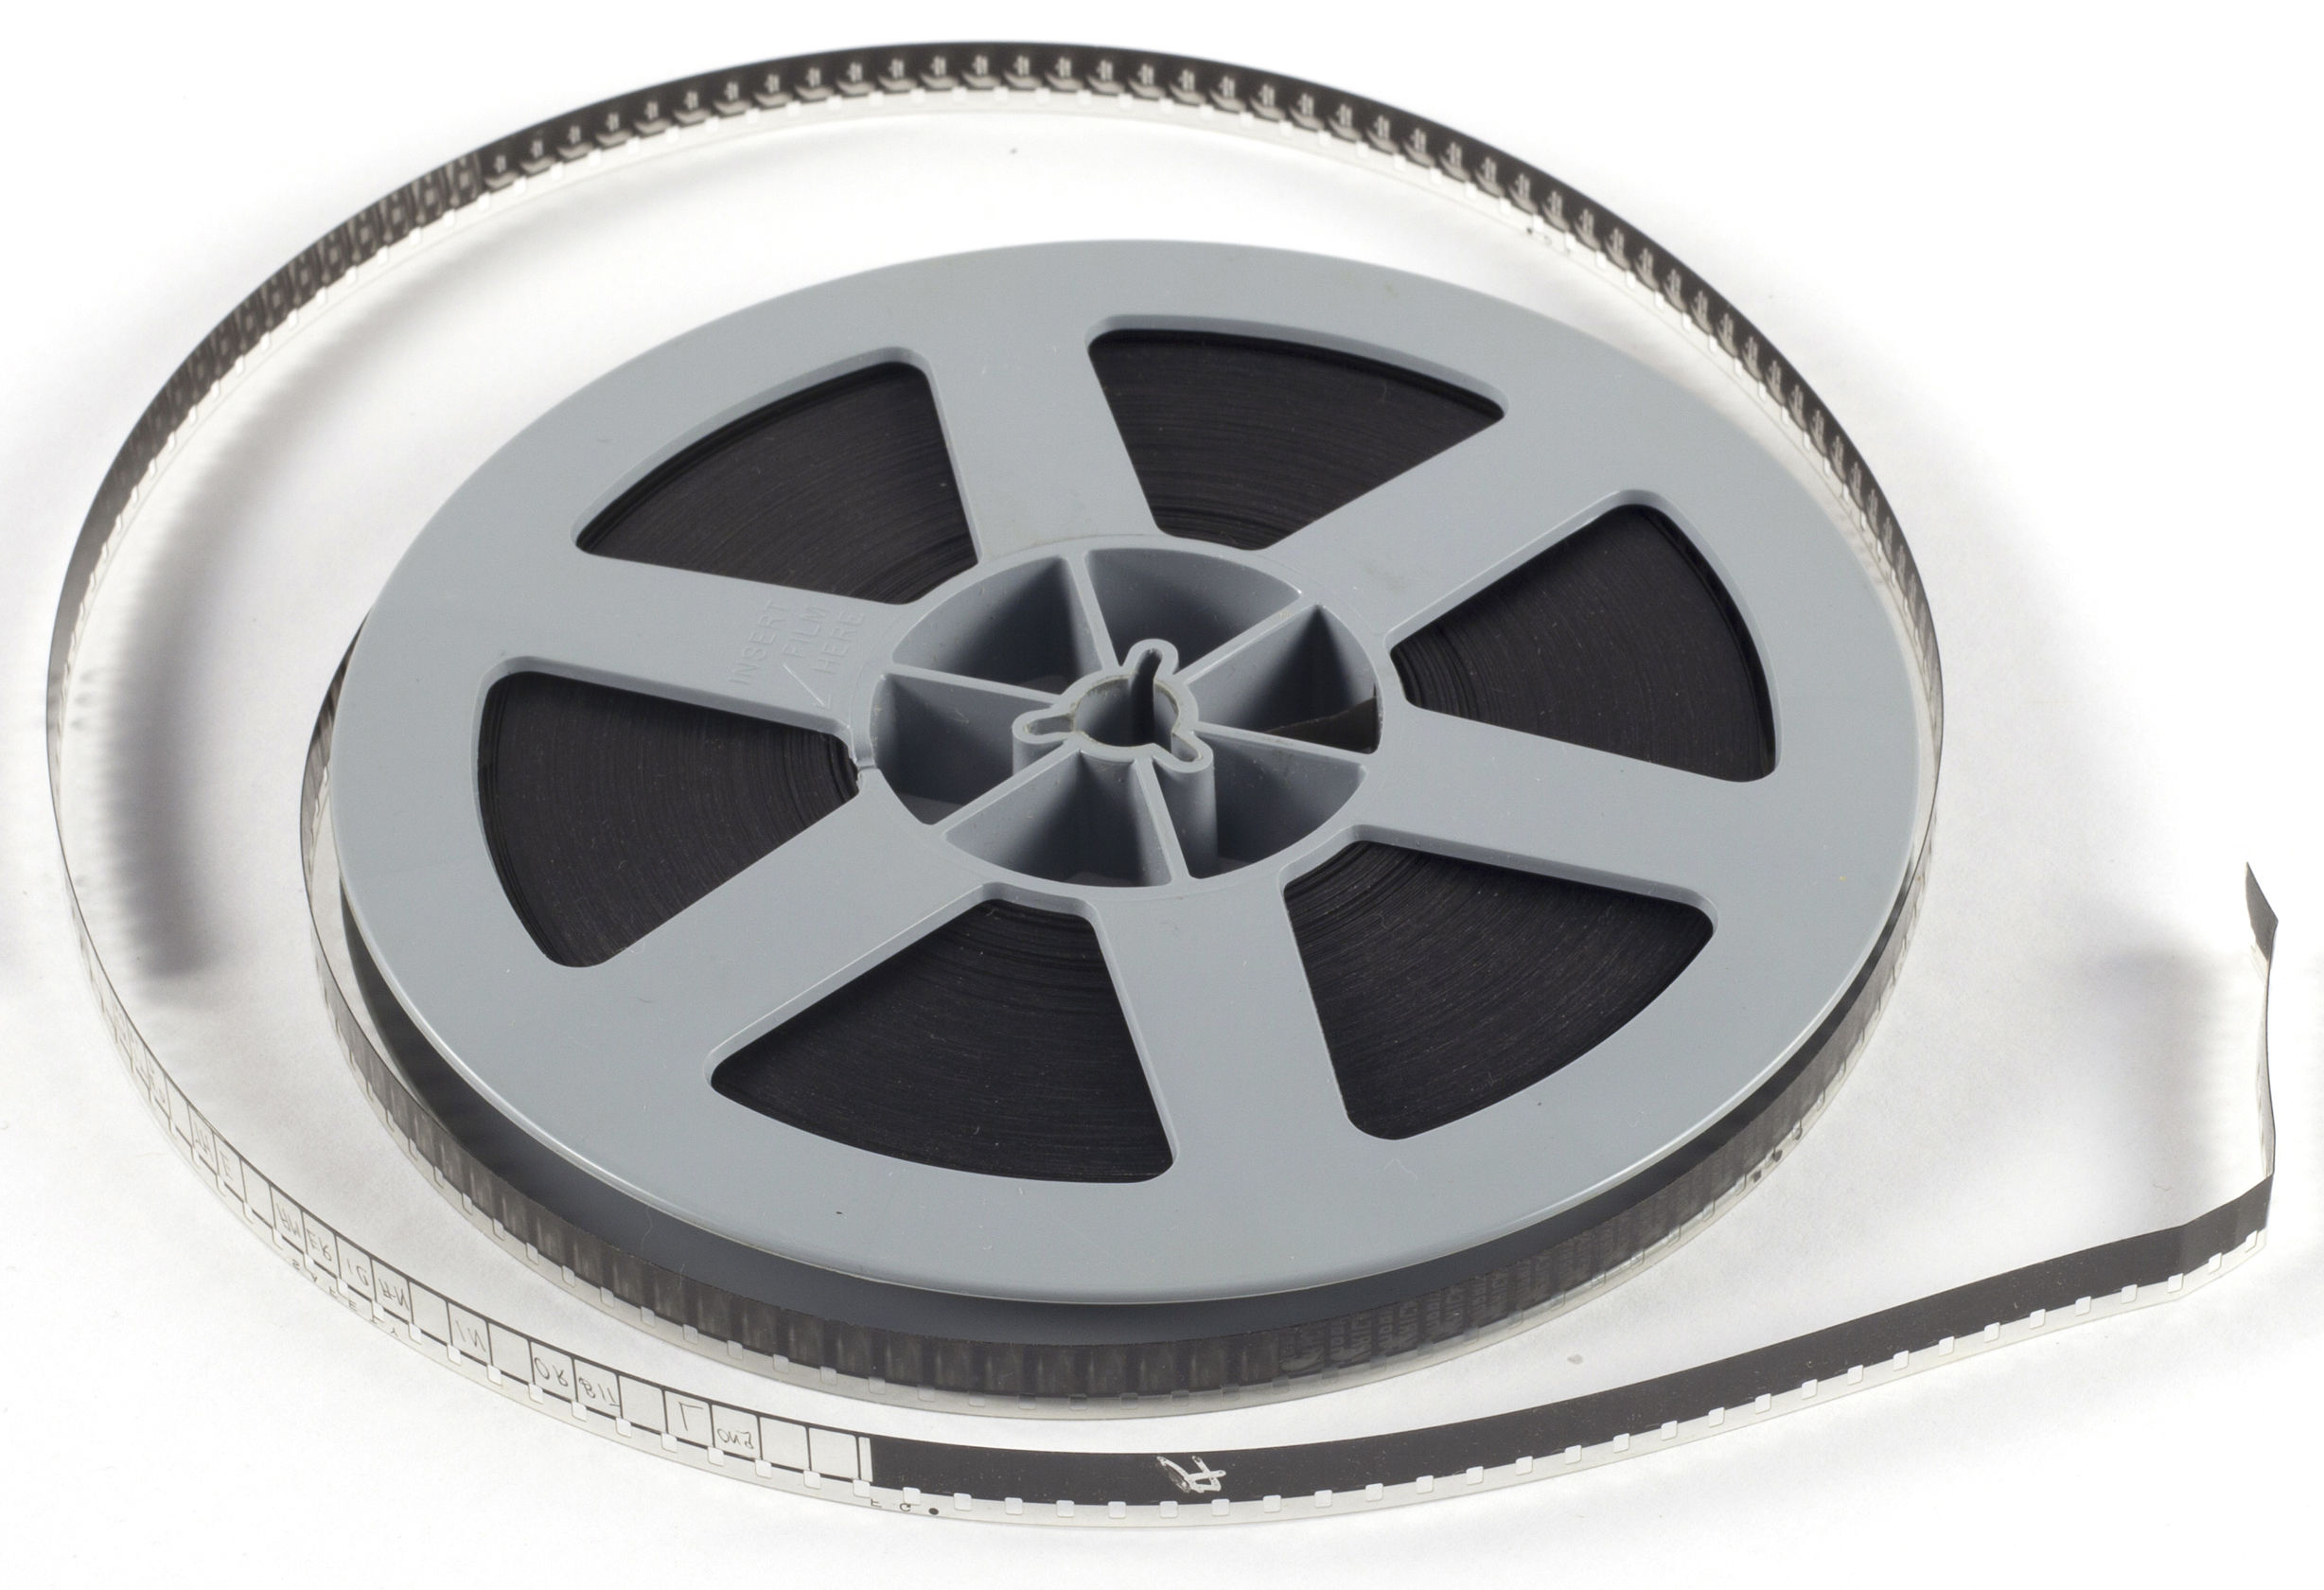 Movie reel stock photo. Image of white, lens, projectionist - 624268